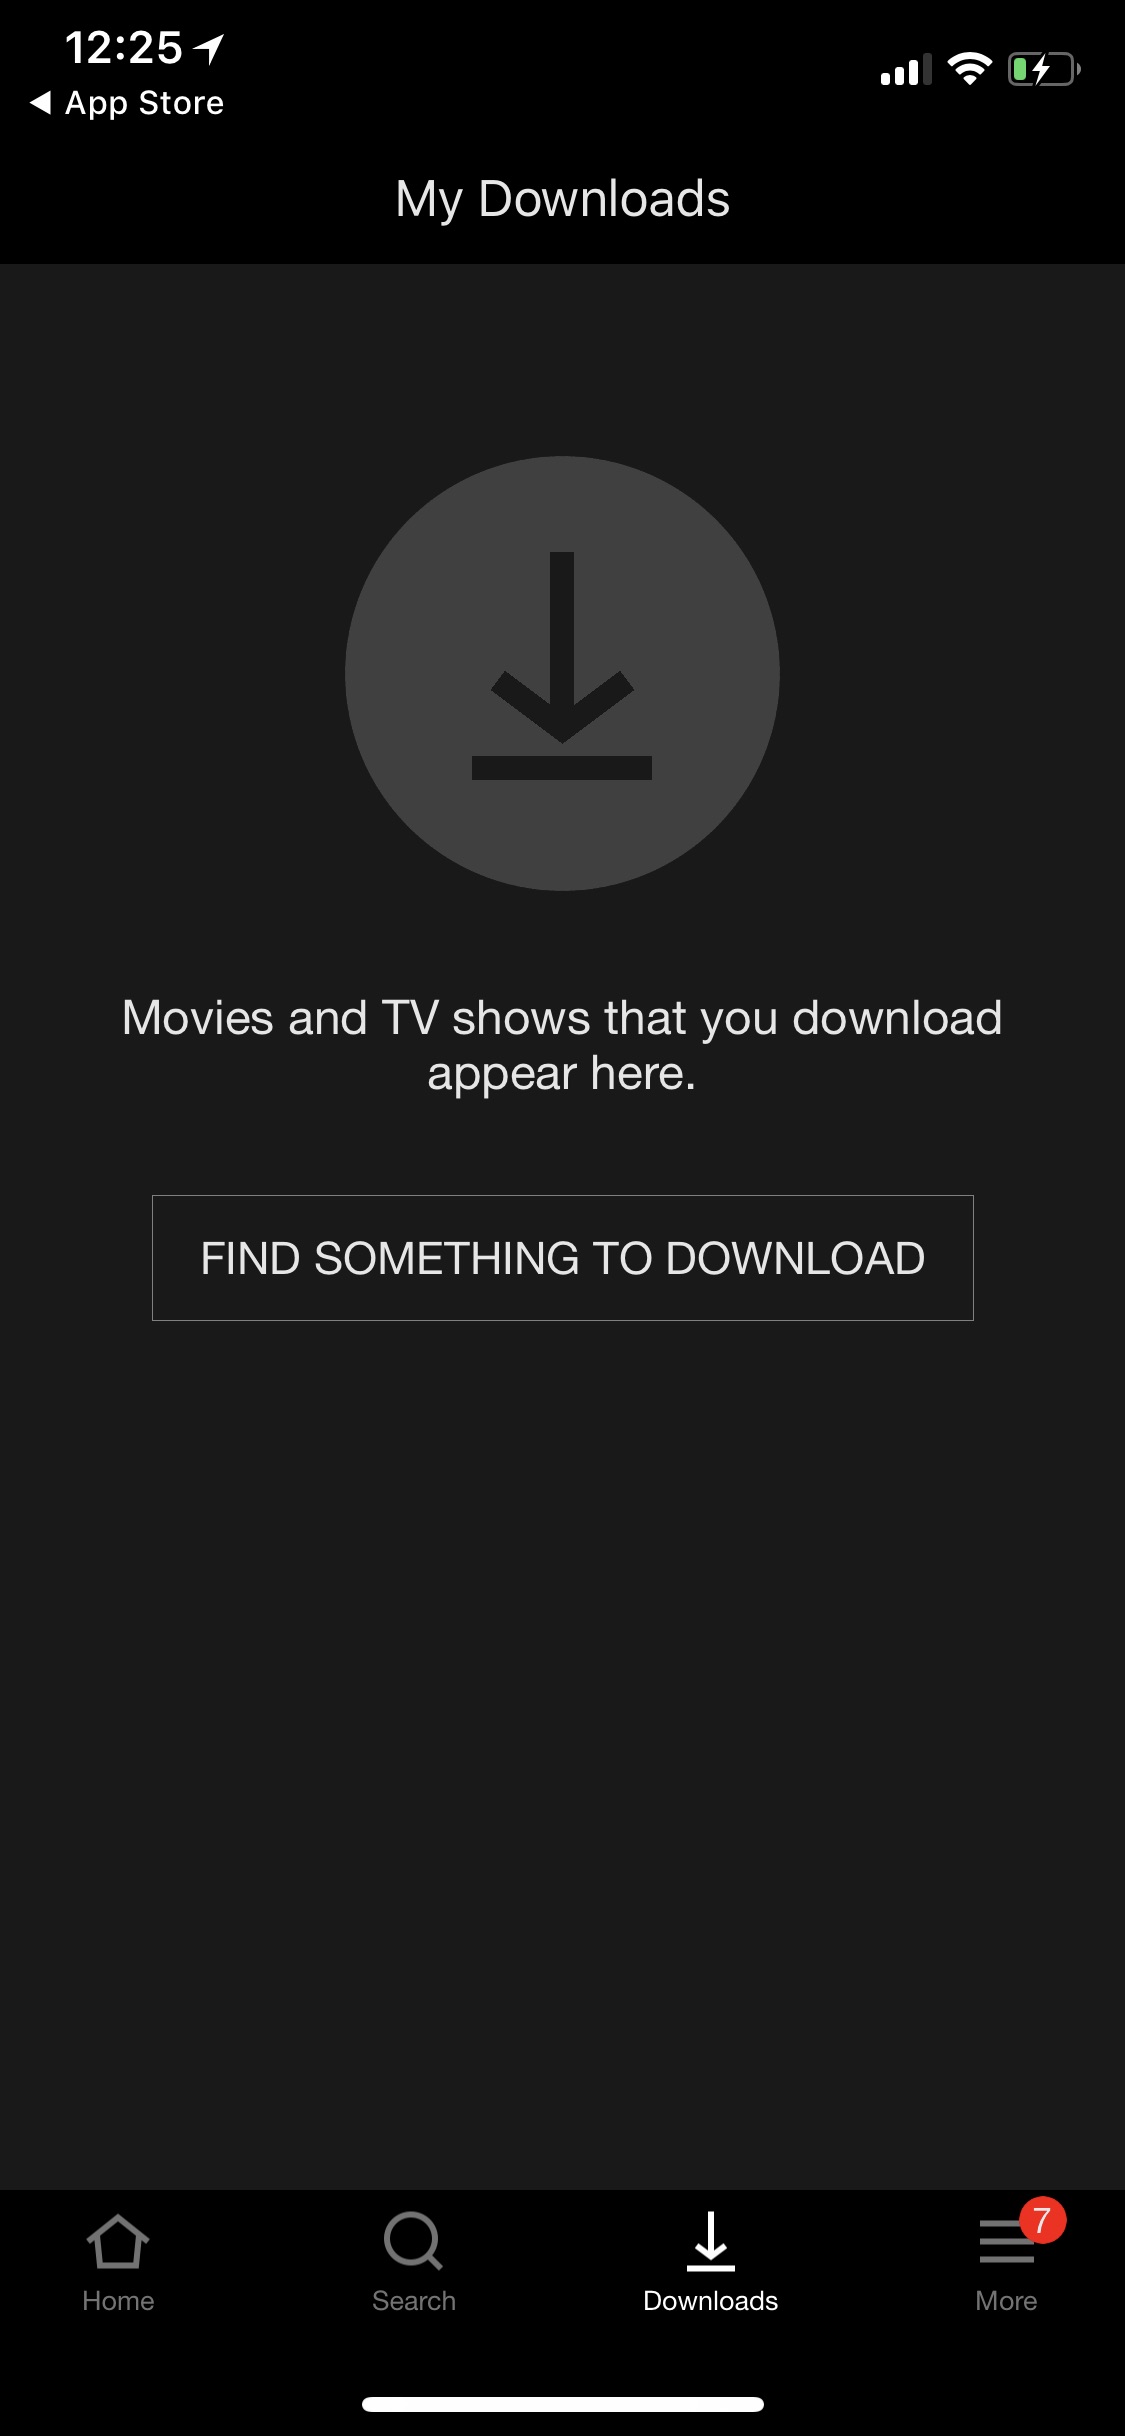 Netflix Rolls Out New App Design With Tab Bar